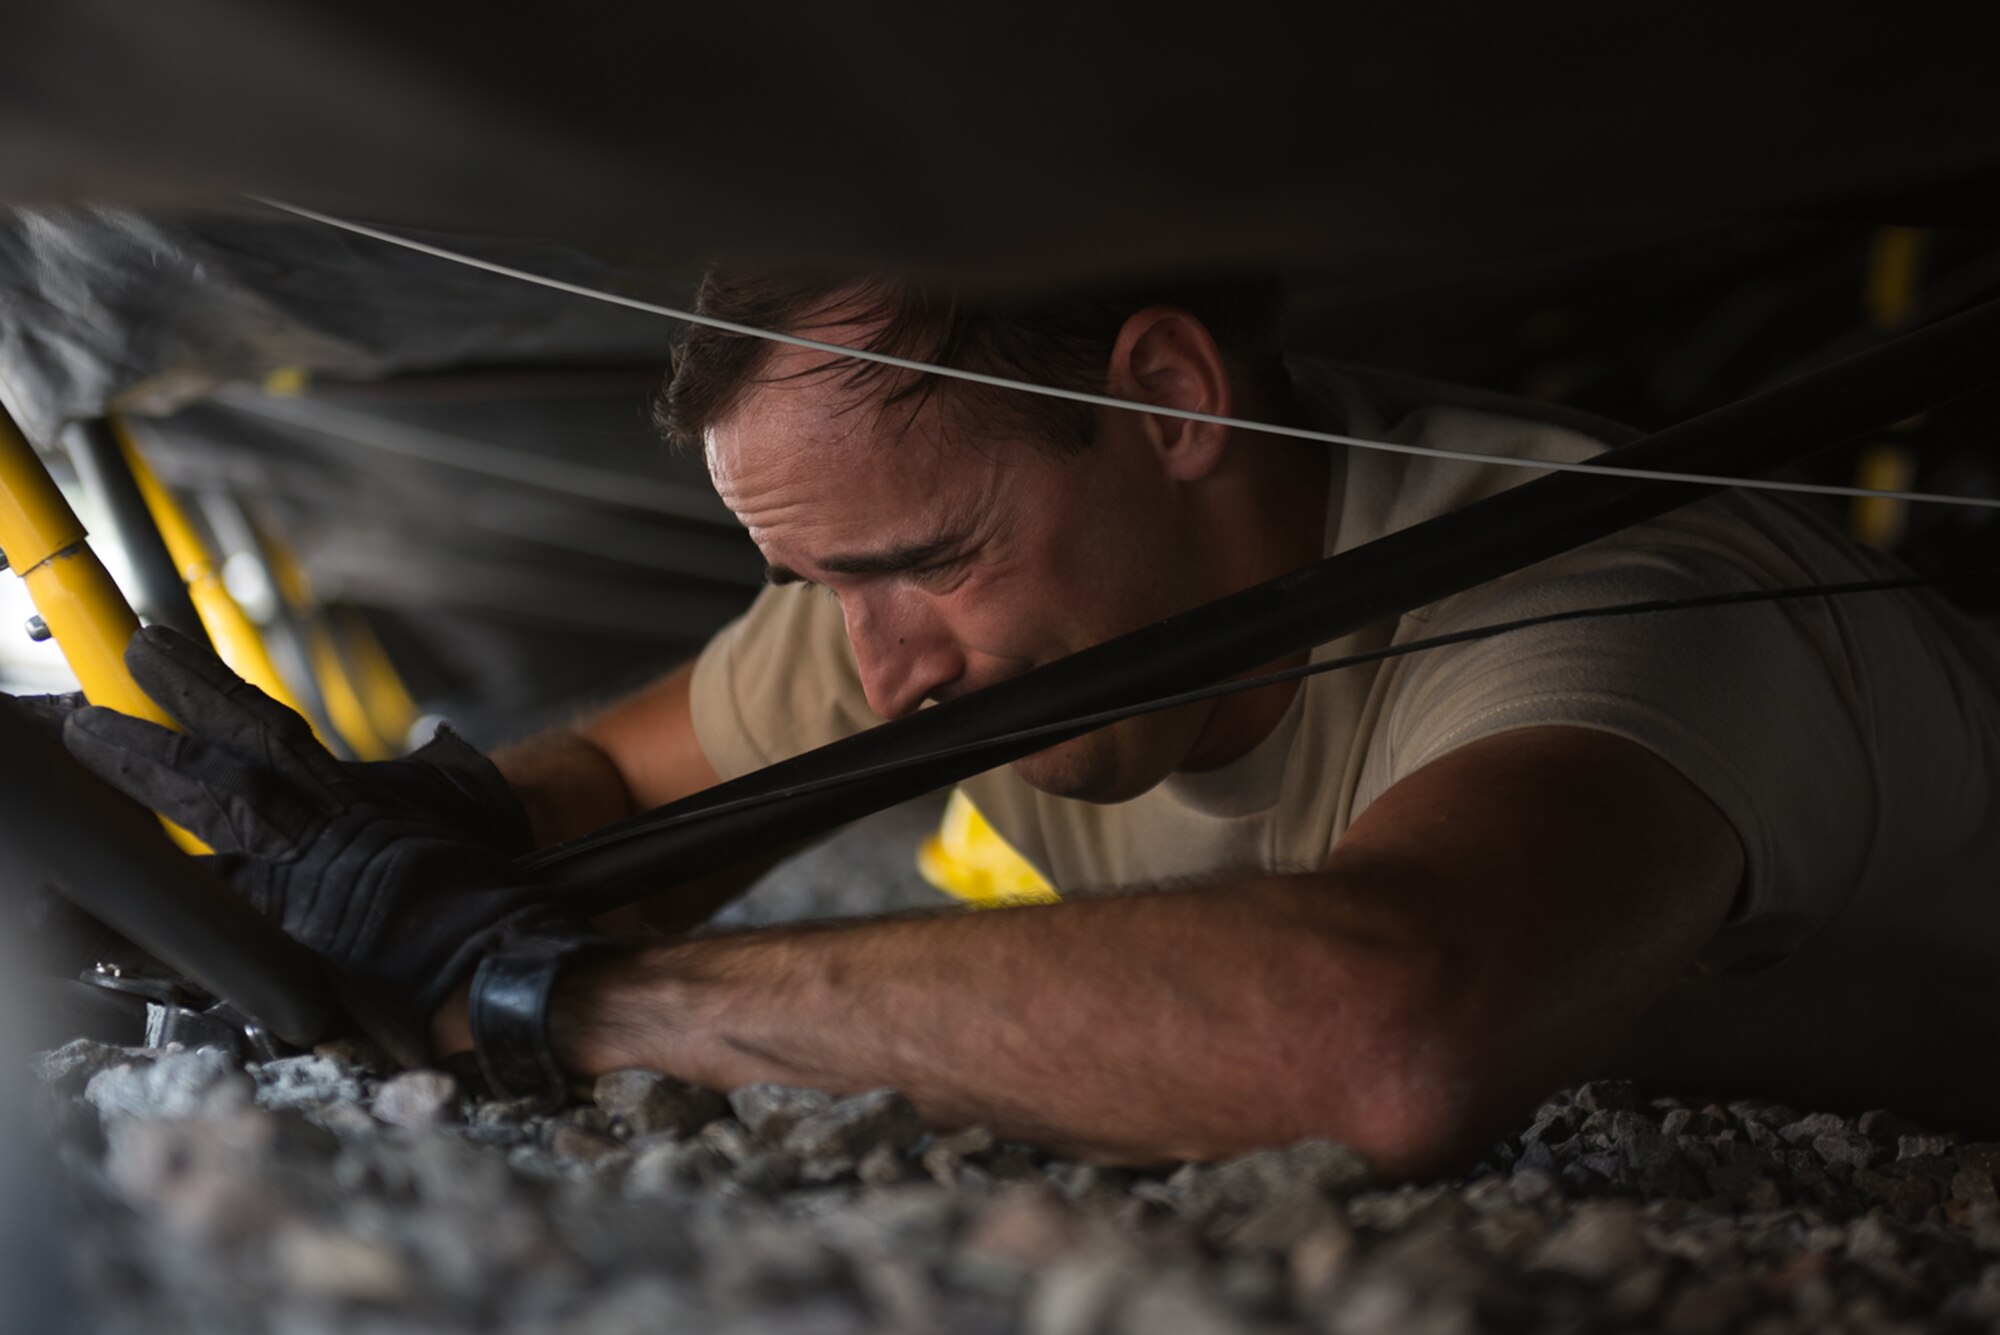 A U.S. Airman assigned to the 1st Combat Communications Squadron replaces a tent pole during Exercise Lending Hand on Ramstein Air Base, Germany, Aug. 21, 2017.